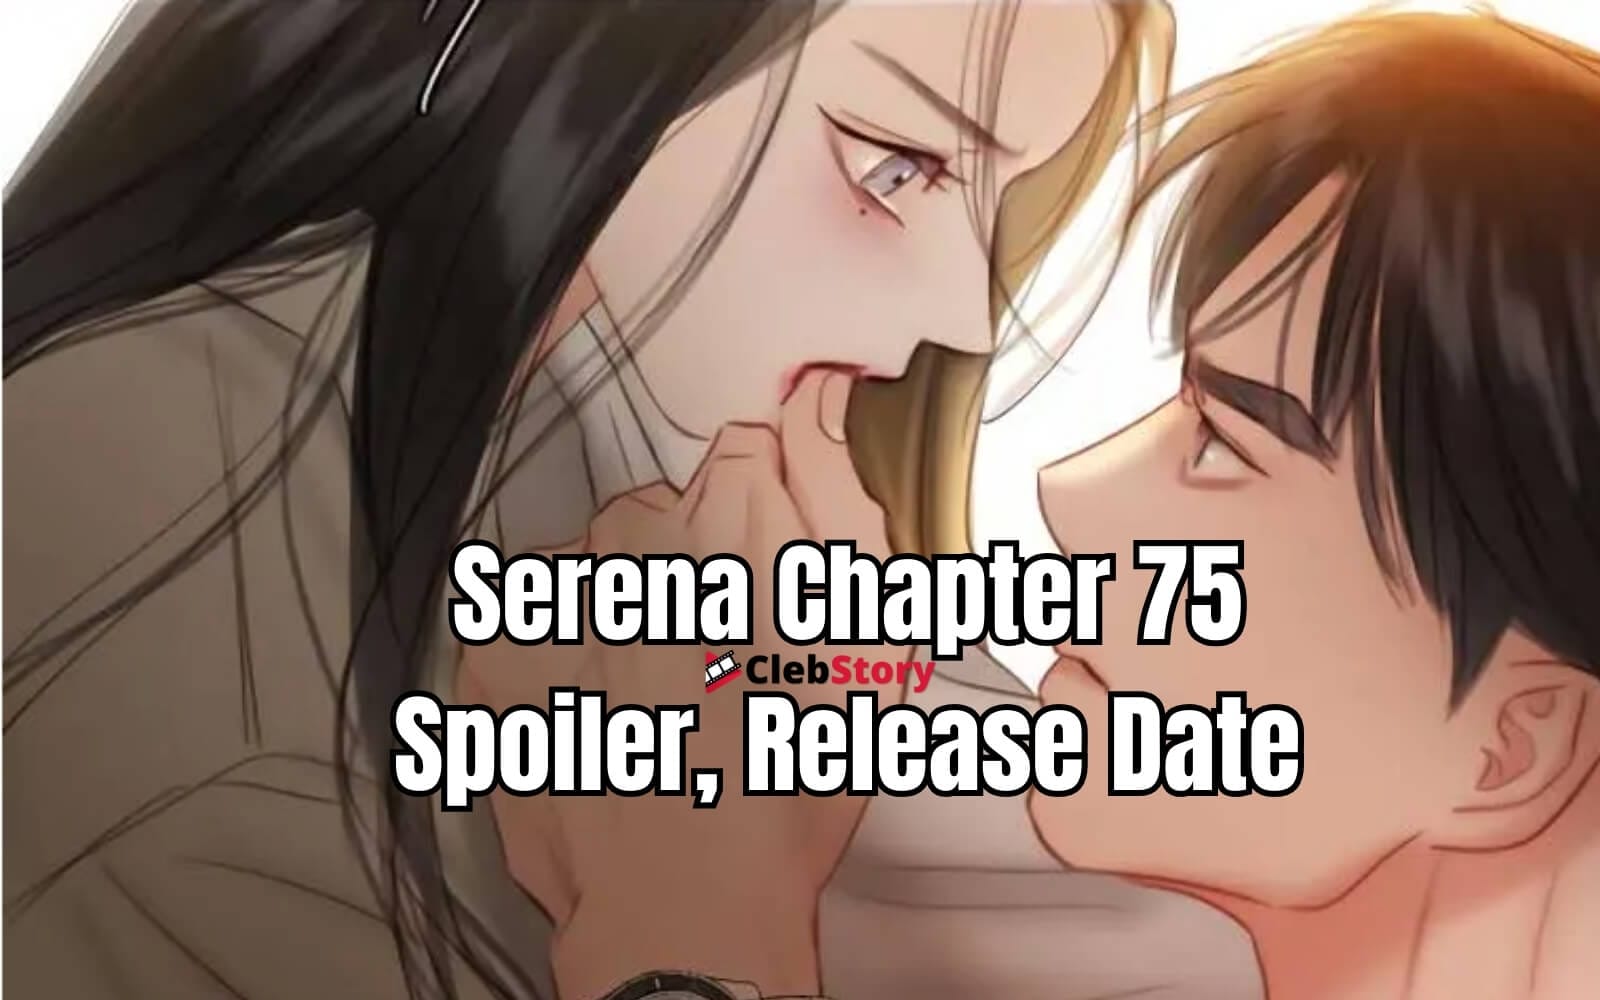 Serena Chapter 75 Release Date